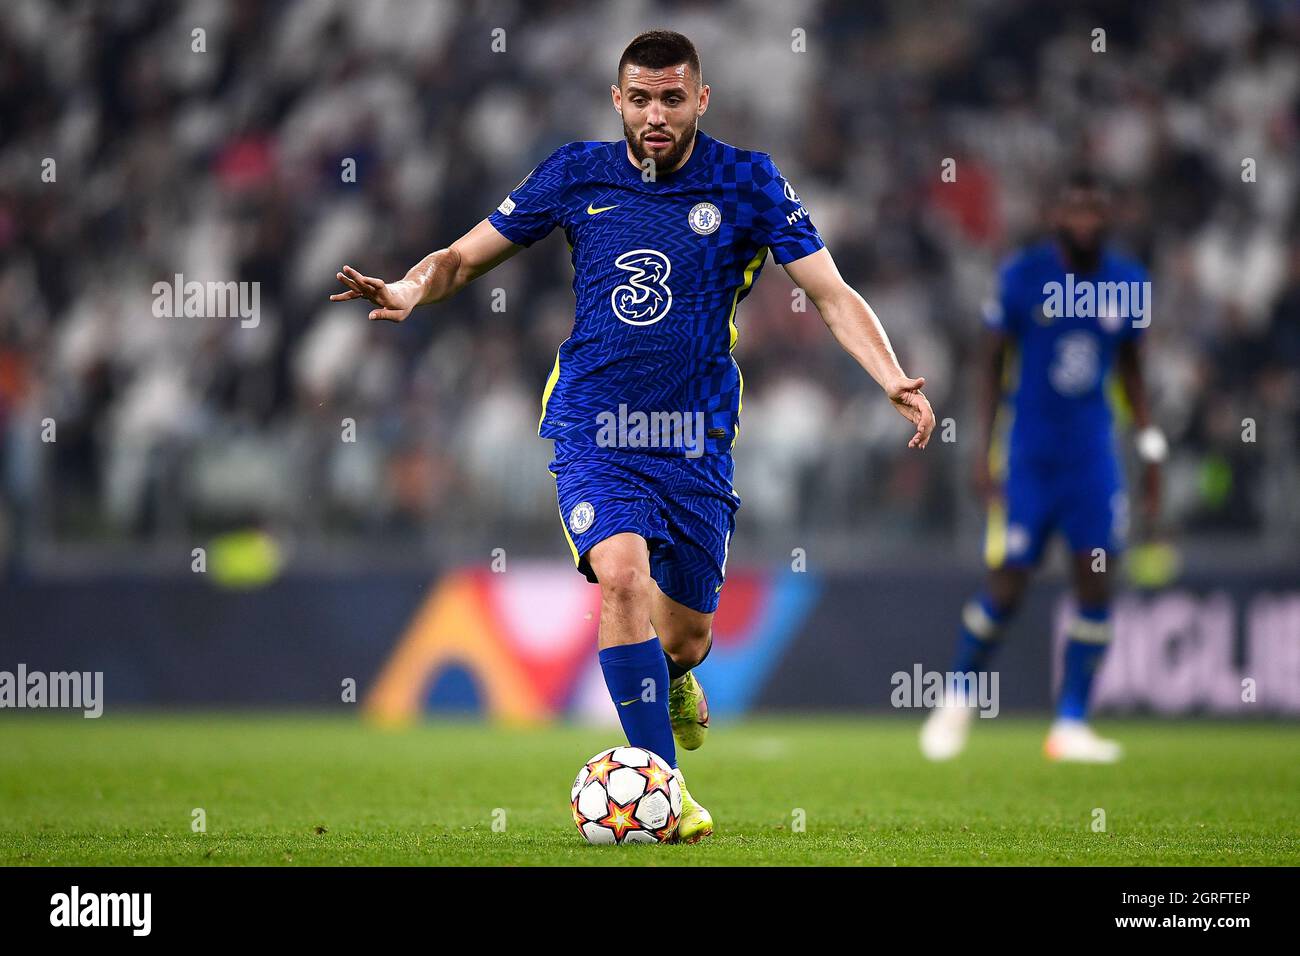 Turin, Italy. 29 September 2021. Mateo Kovacic of Chelsea FC in action during the UEFA Champions League football match between Juventus FC and Chelsea FC. Credit: Nicolò Campo/Alamy Live News Stock Photo